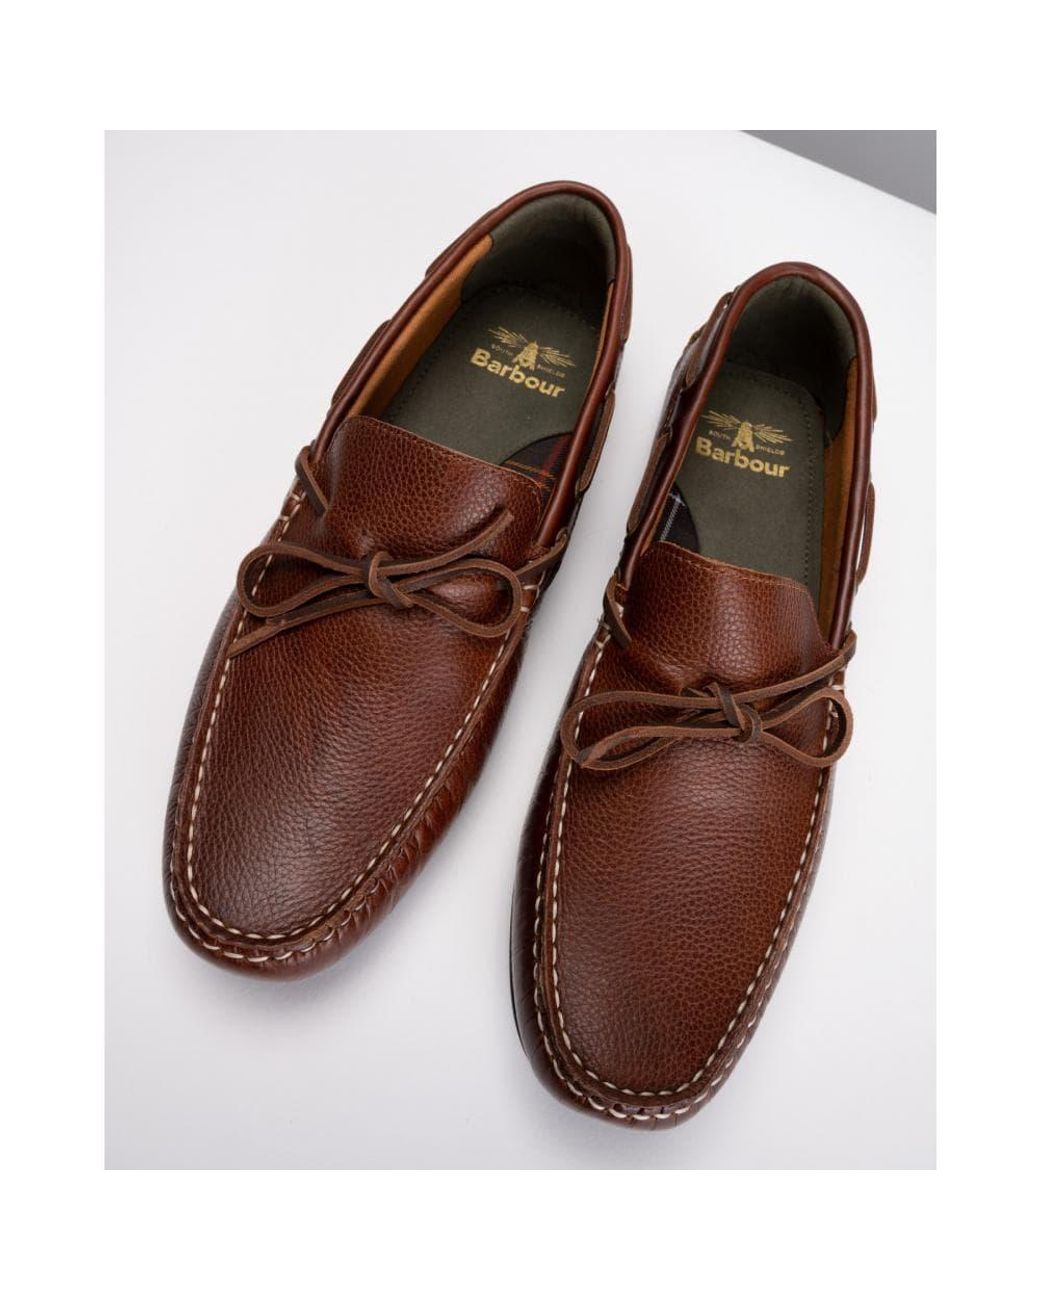 Barbour Leather Clark Shoes in Cognac (Brown) for Men | Lyst